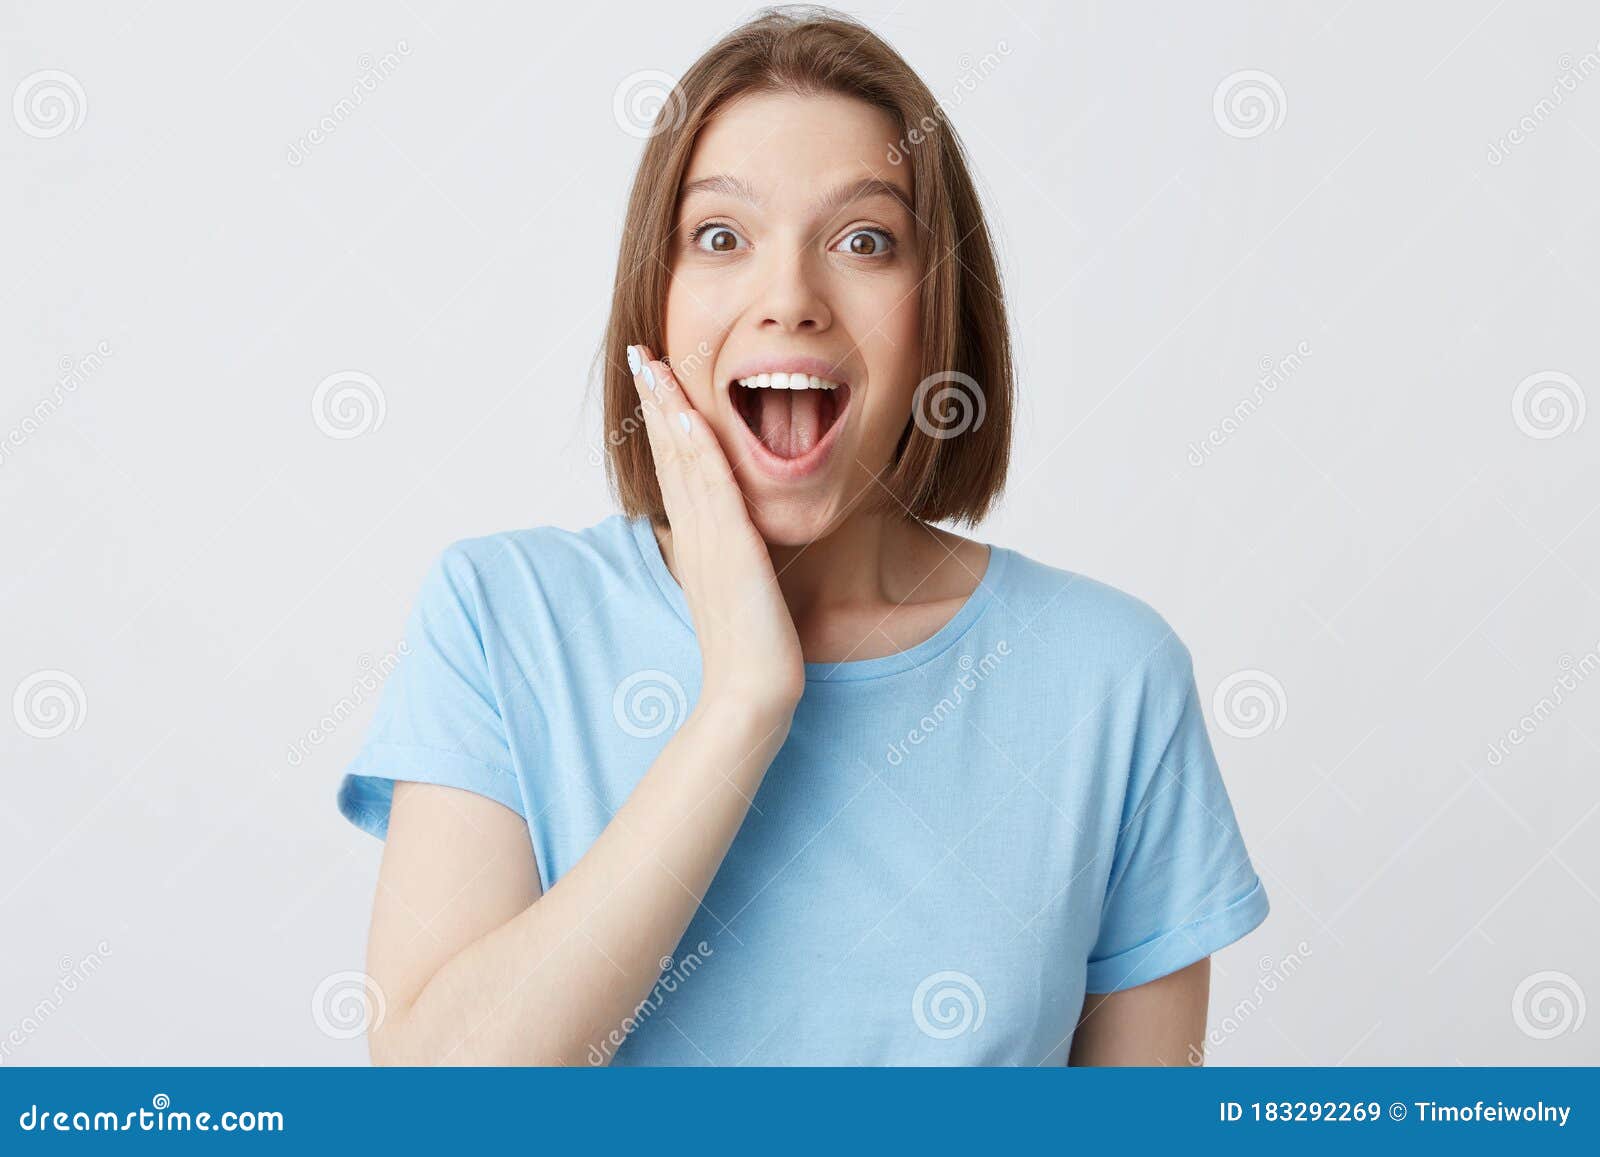 Closeup Of Happy Excited Attractive Young Woman In Blue T Shirt With Opened Mouth Touching Her 